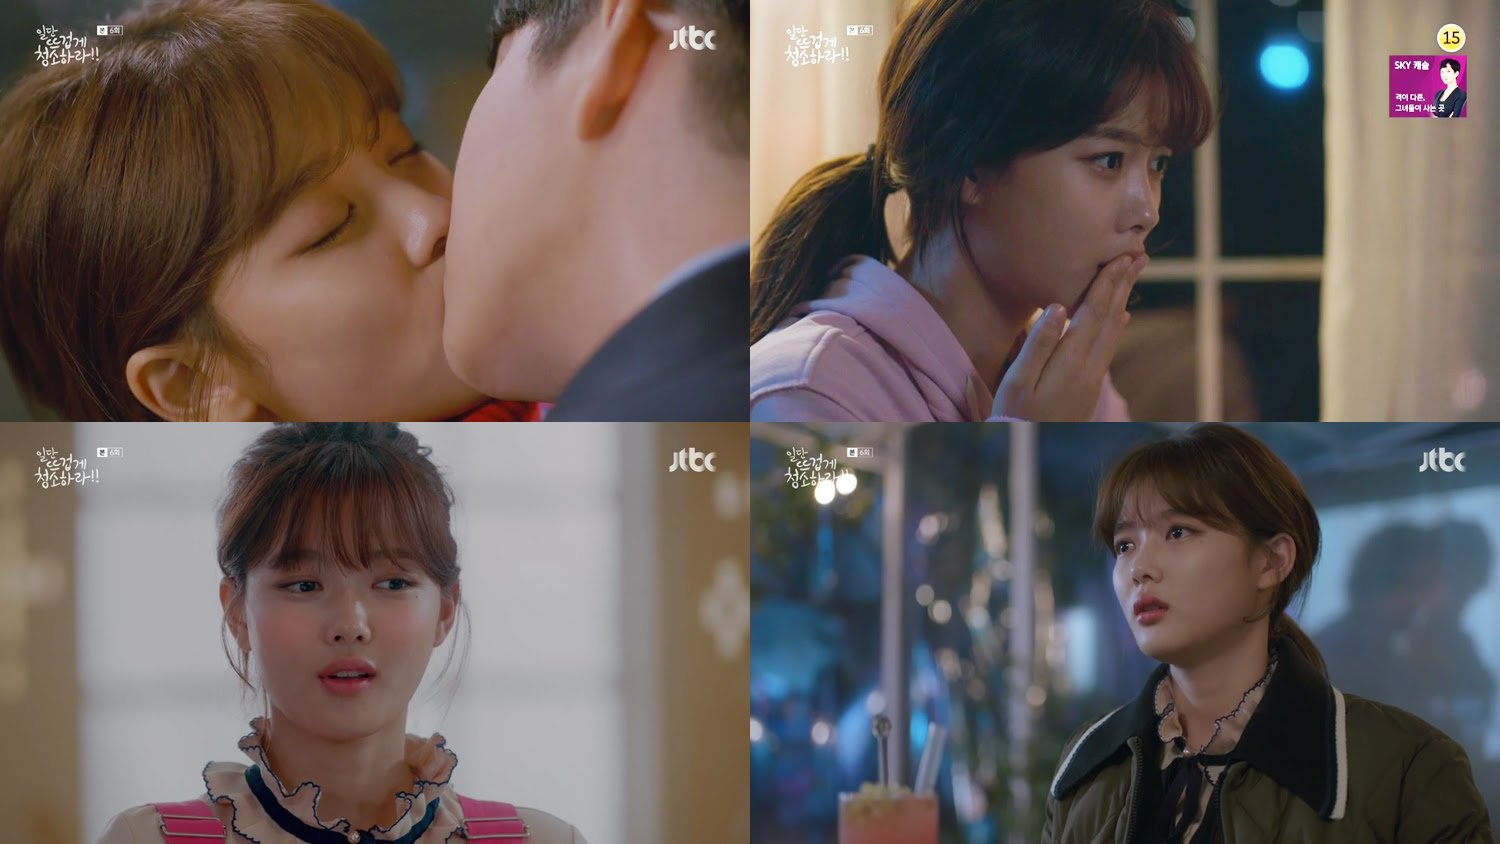 Kim Yoo-jung (Gilosol) made the viewers smile with the appearance of Yoon Kyun-sang (Jang Seon-gyeol) and solo thumbing in the JTBC monthly drama Steam Hot Once broadcast on the 11th.Kim Yoo-jung, who was kissed by Yoon Kyun-sang, was confused and excited that Yoon Kyun-sang liked him.He showered for more than an hour from the morning, surprised his father Kim Won-hae (Gong Tae) and his brother Lee Do-hyun (Odol), and unlike usual, he decorates beautifully and comes to work to catch the attention of the surroundings.Kim Yoo-jung reacted to the small behavior of Yoon Kyun-sang like a person who fell in love and made people laugh.A shy smile act, conscious of the Yoon Kyun-sang, made the cute charm stand out.However, Yoon Kyun-sang finished a short thumb by drawing a line that Kim Yoo-jung had no heart to love.Kim Yoo-jung could not hide his wounded eyes in front of the cold-turned Yoon Kyun-sang.In the midst of sadness, Kim Yoo-jung and Yoon Kyun-sang are raising questions about how the relationship will move forward.Kim Yoo-jung, who has become a ball red well and raised JiSoo, will be broadcast every Monday and Tuesday at 9:30 pm.